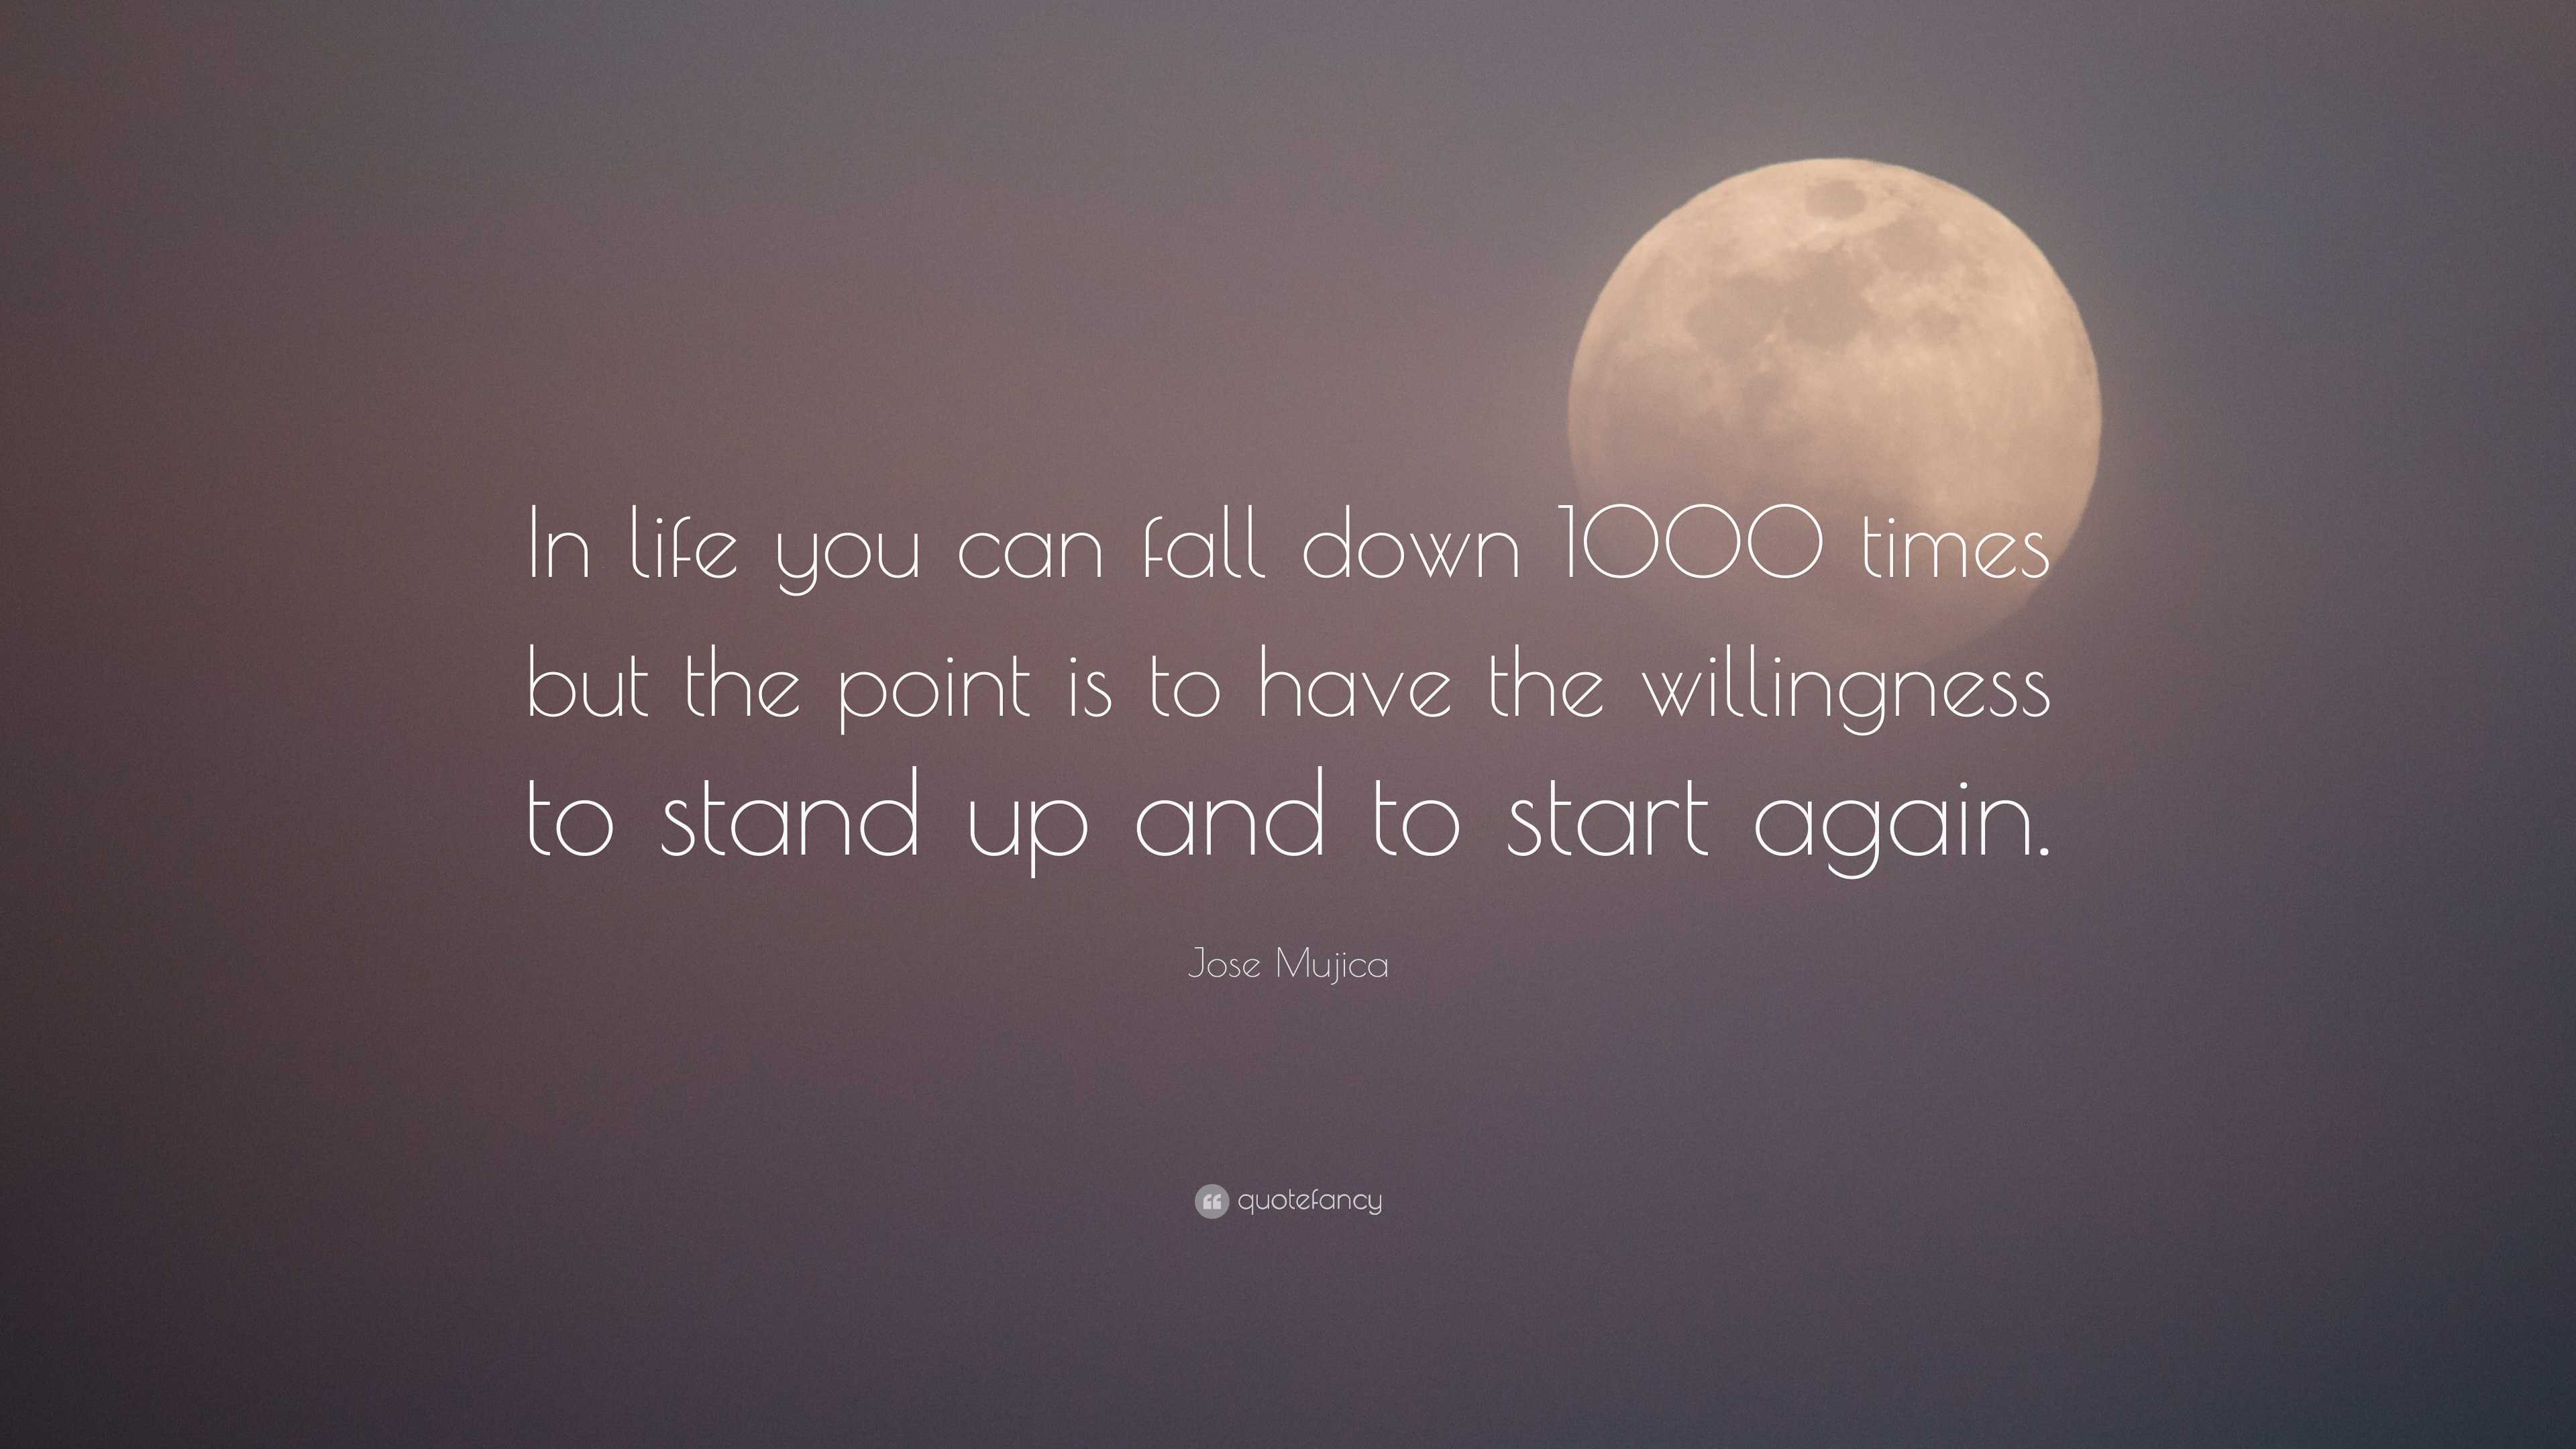 Jose Mujica Quote: “In life you can fall down 1000 times but the point is to